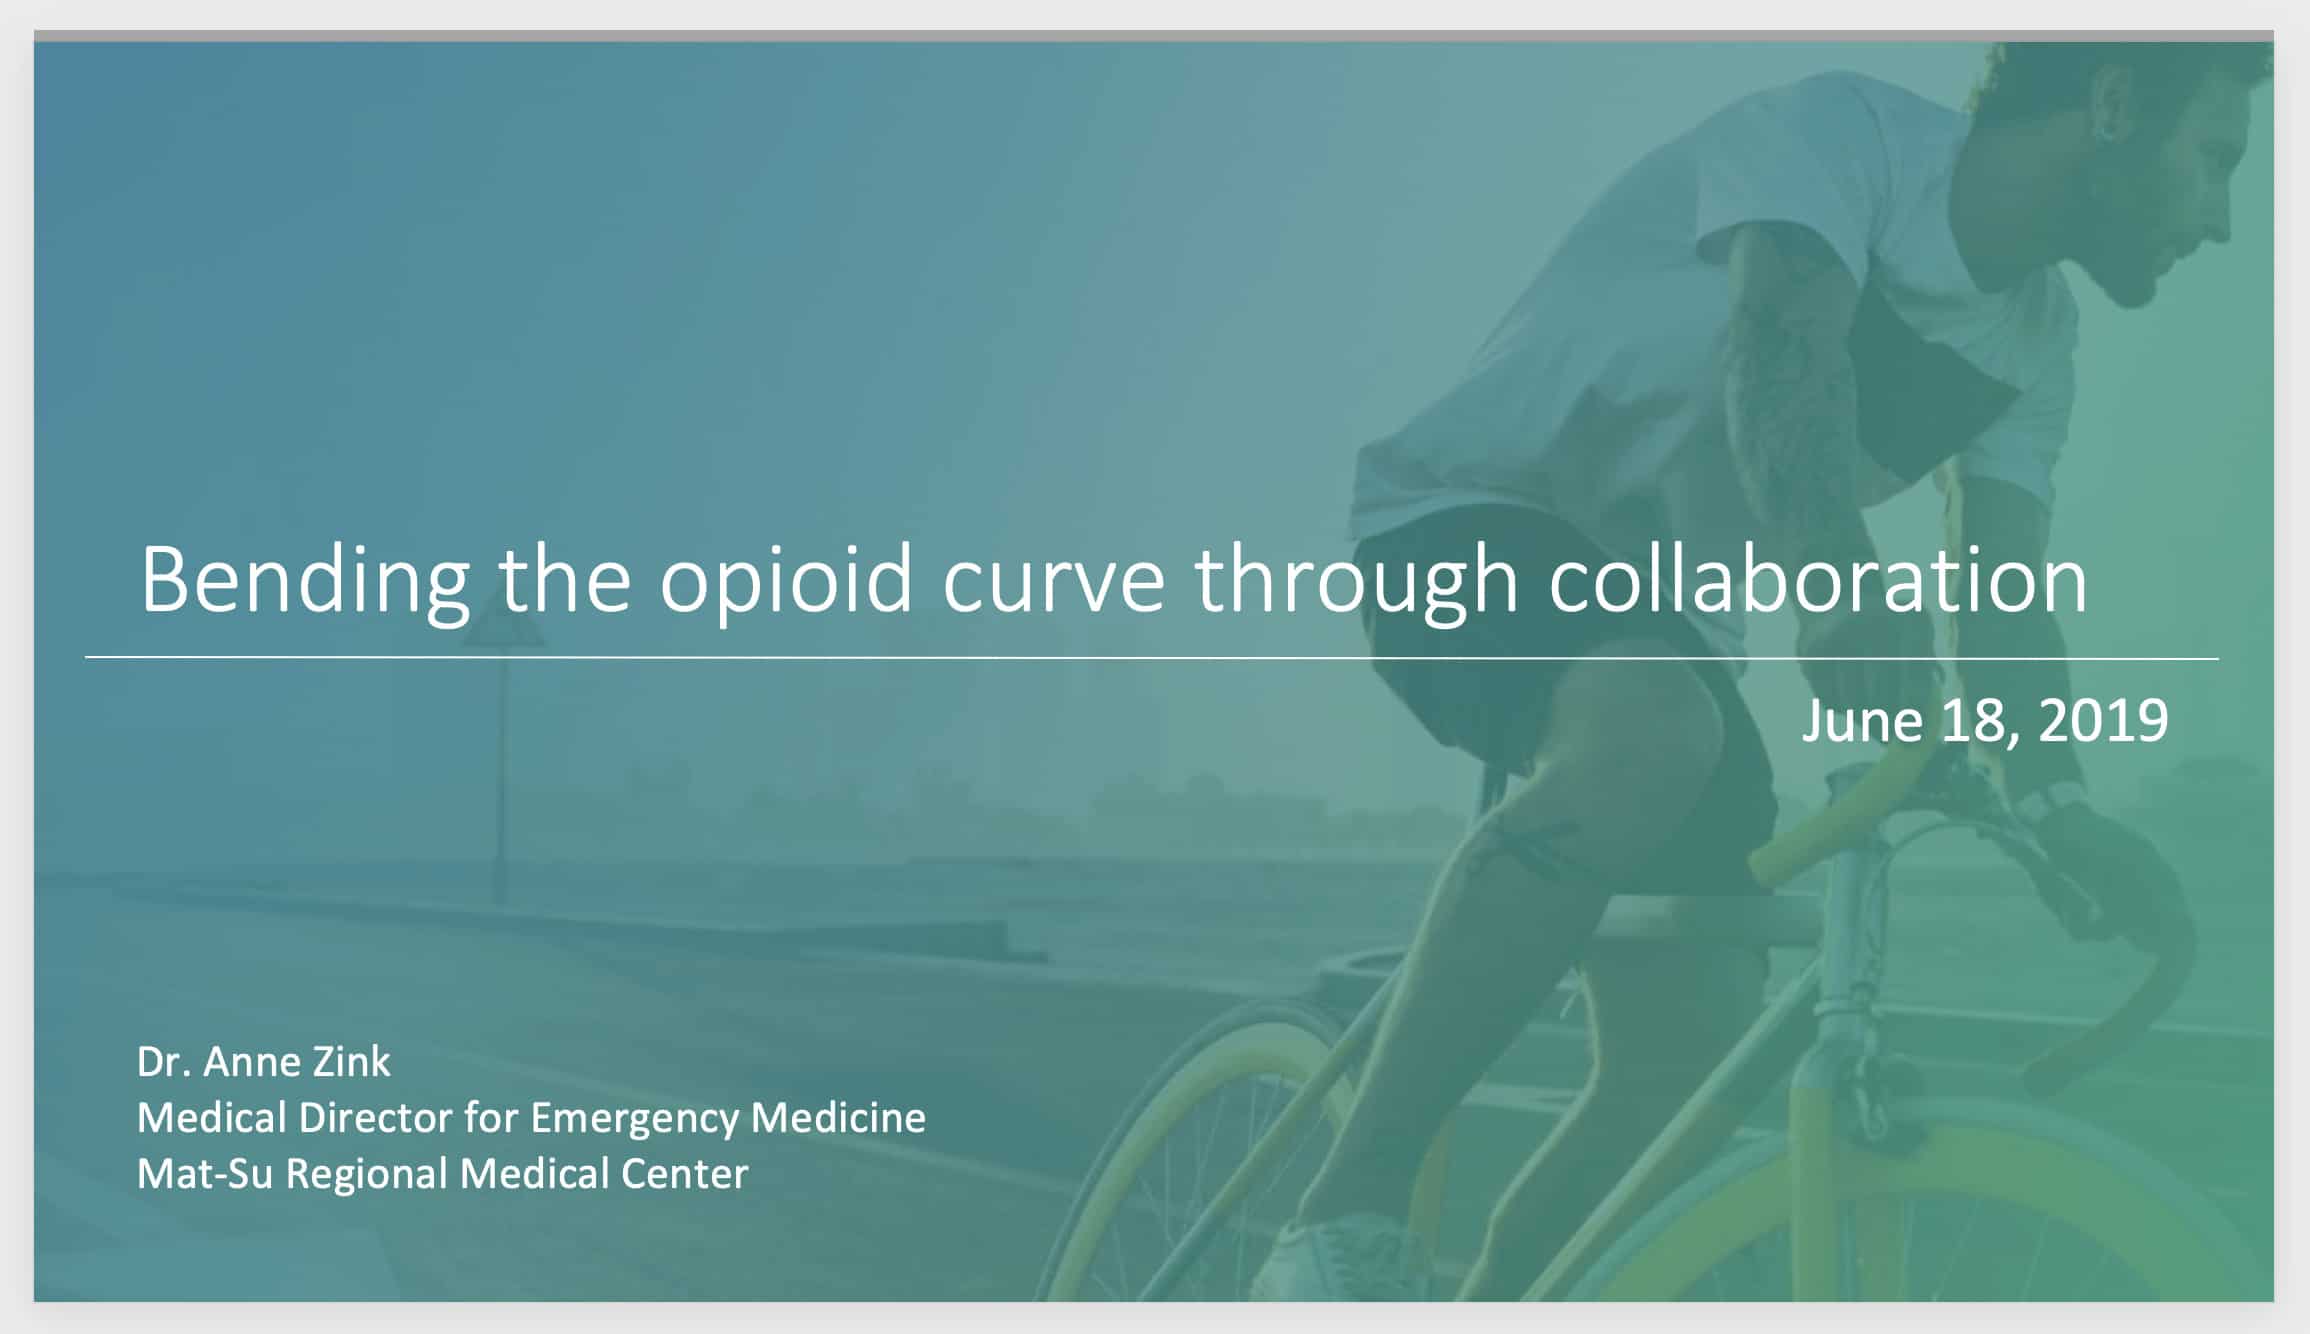 poster advocating bending the opioid curve through collaboration